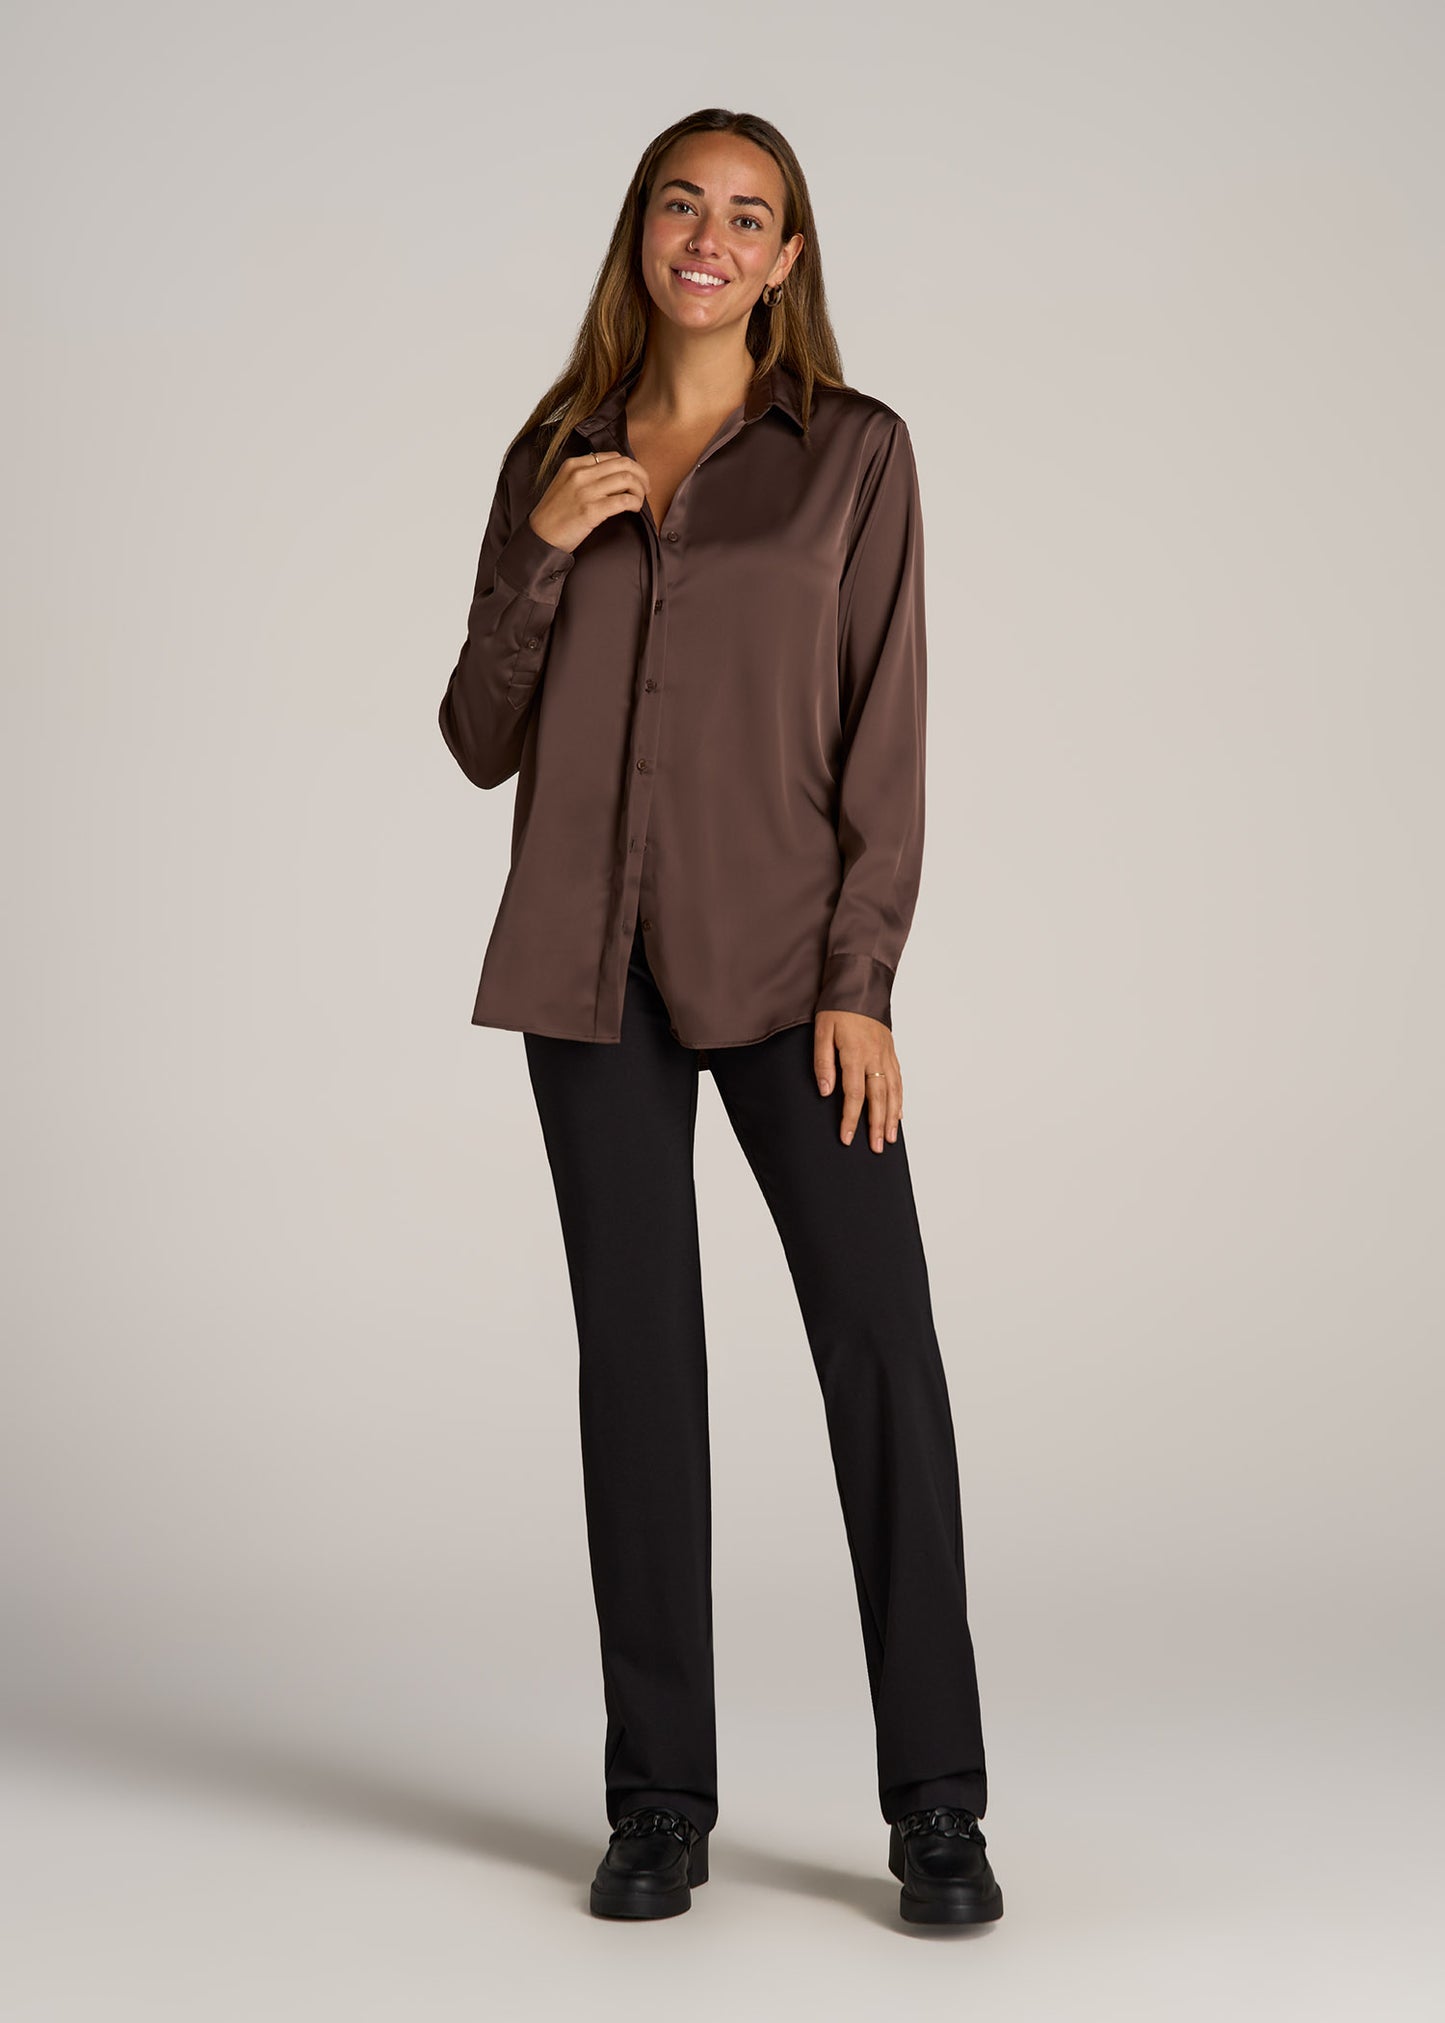 A tall woman wearing American Tall's Relaxed Button Up Tall Women's Blouse in Chocolate Mocha.